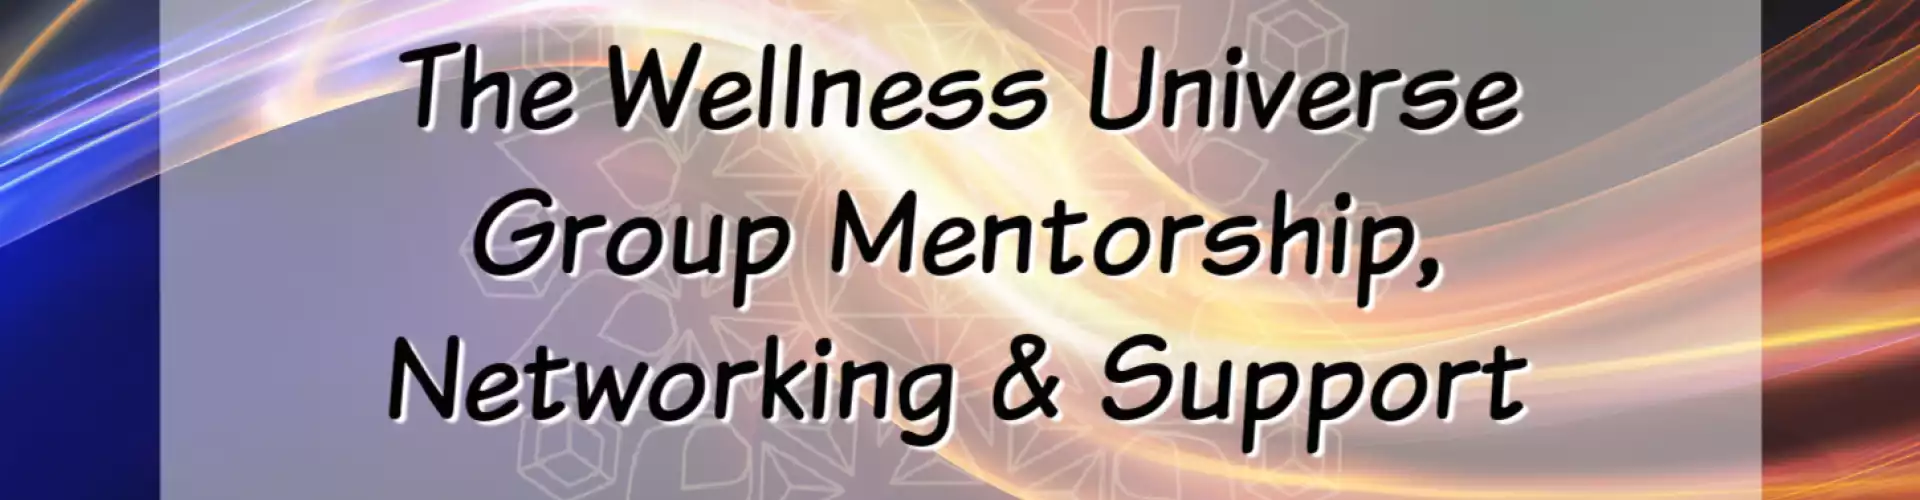 The Wellness Universe Mentorship, Networking & Support